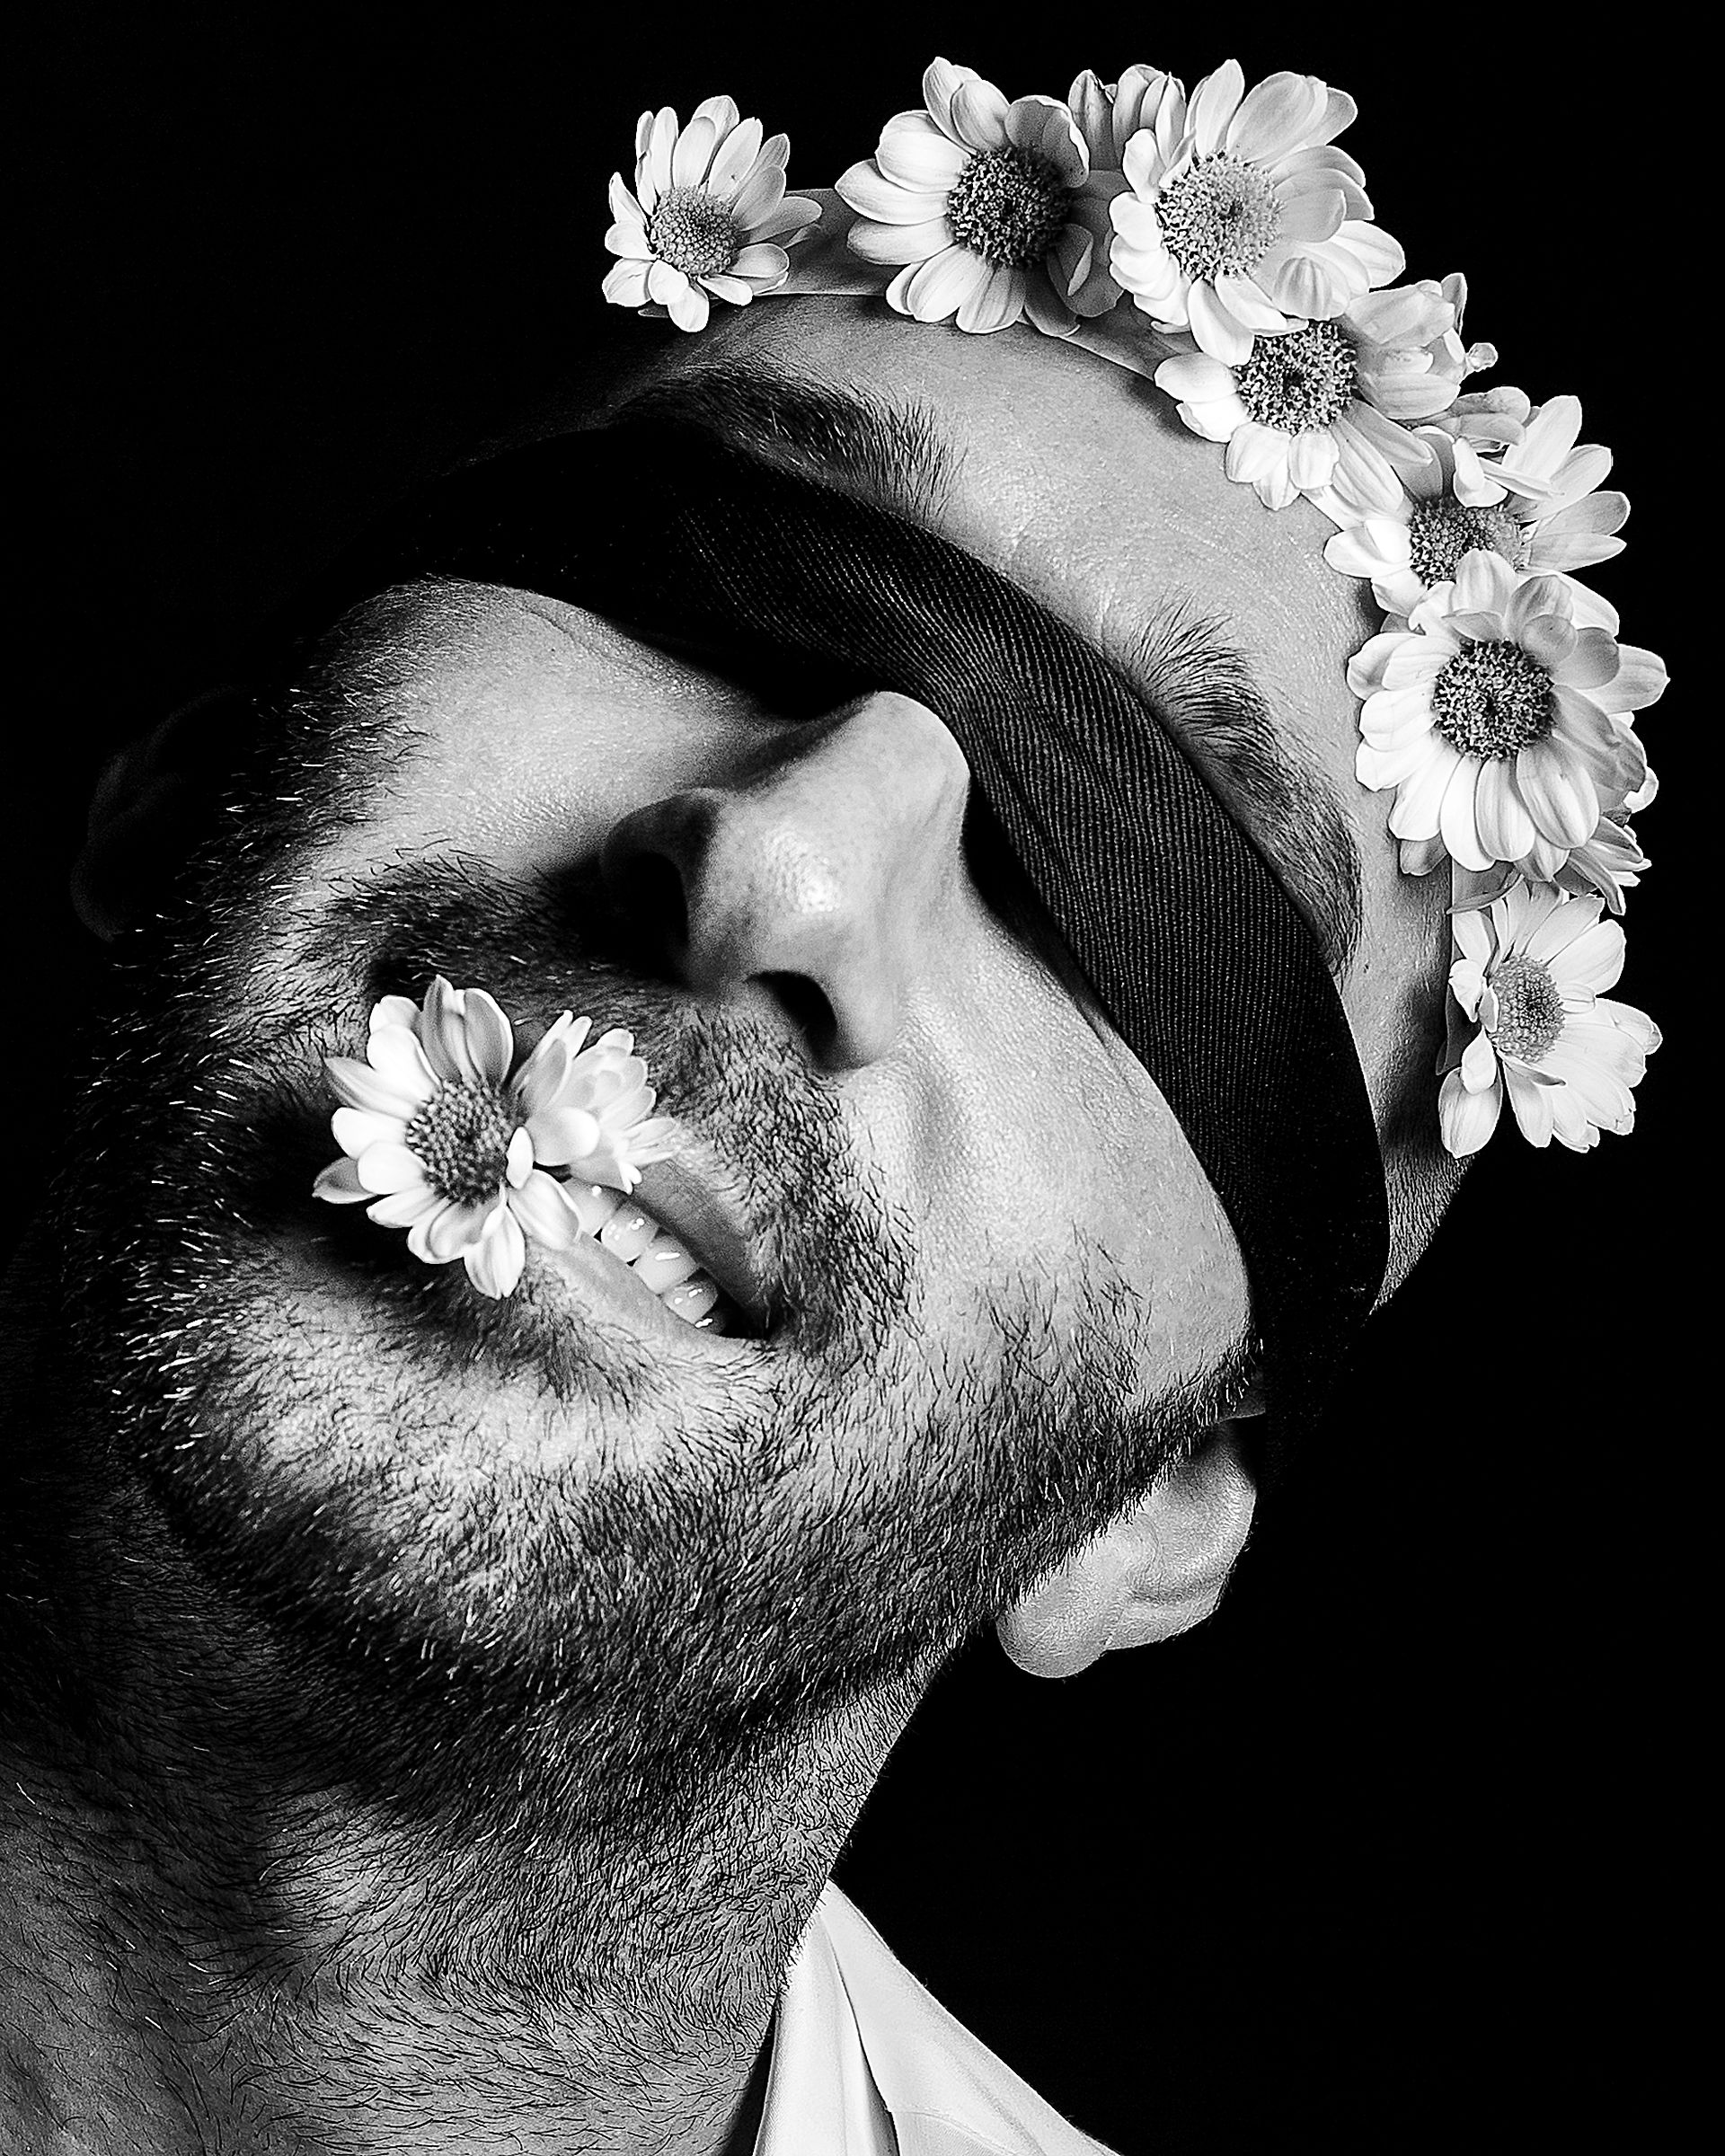 Smile with a flowered blindfold...